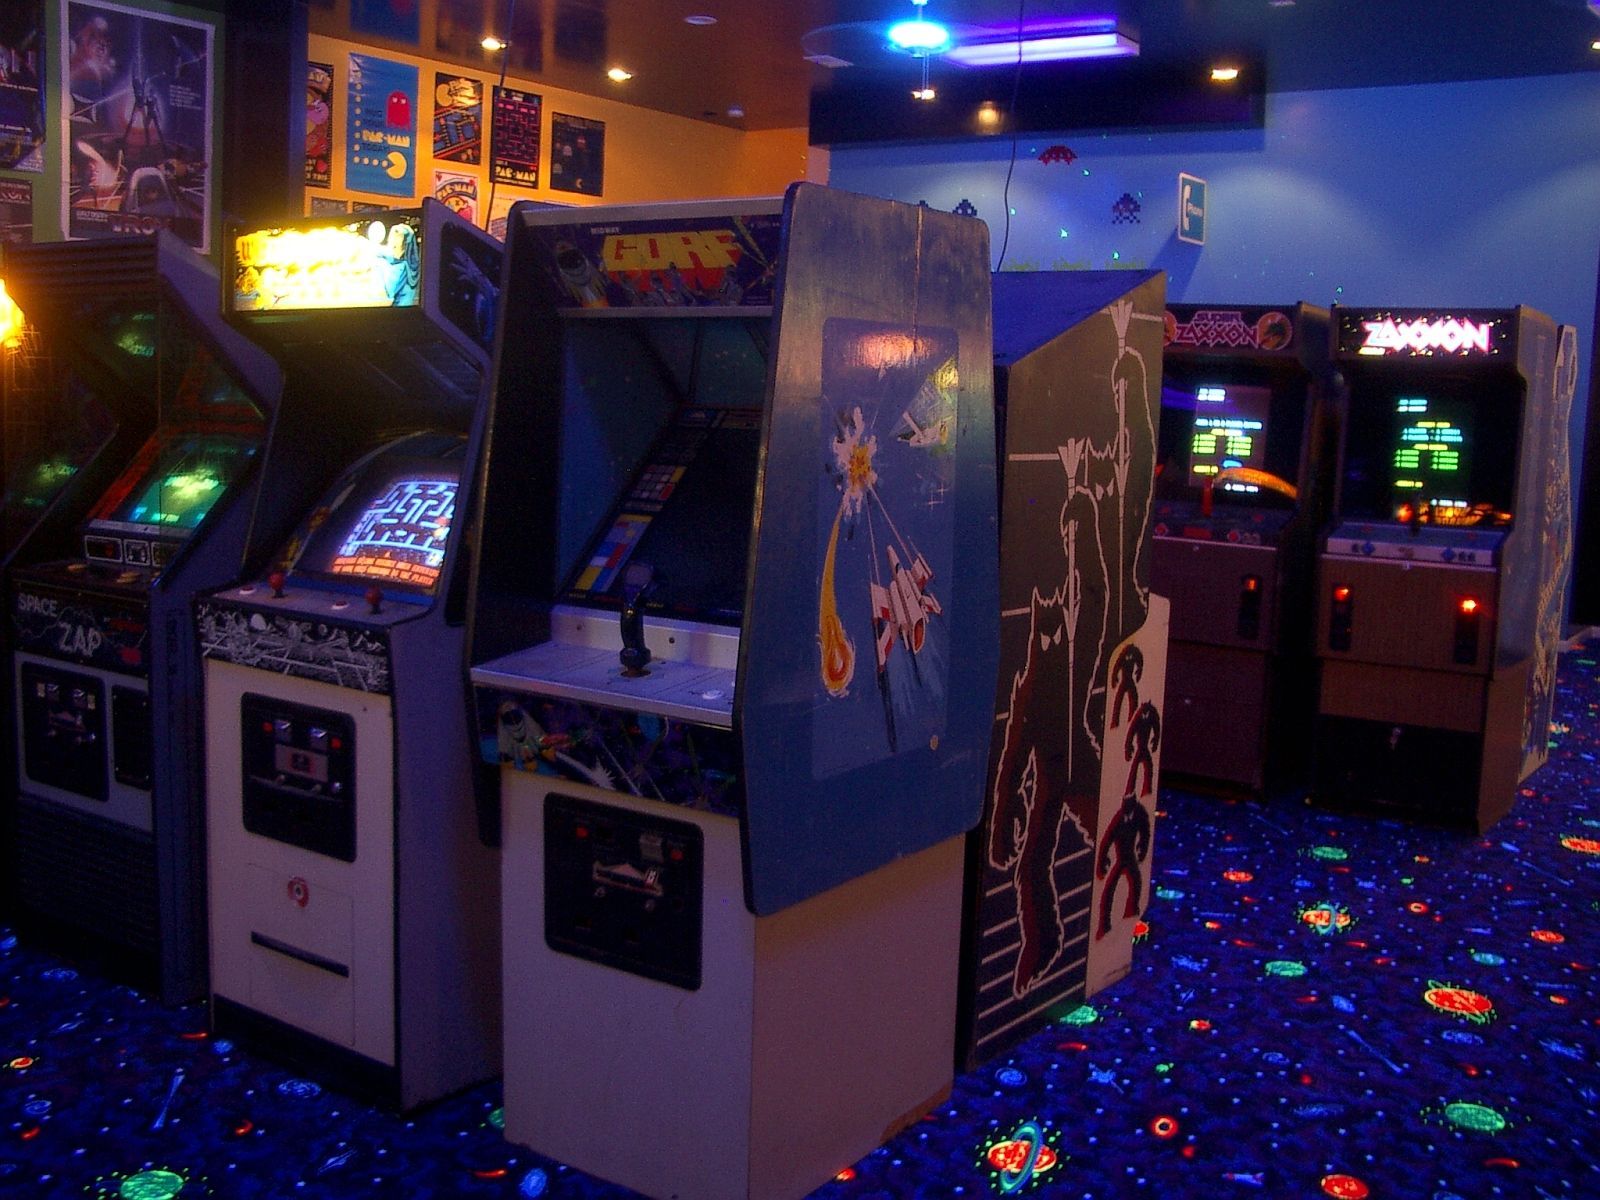 A row of video games are lined up in a dark room. - Arcade